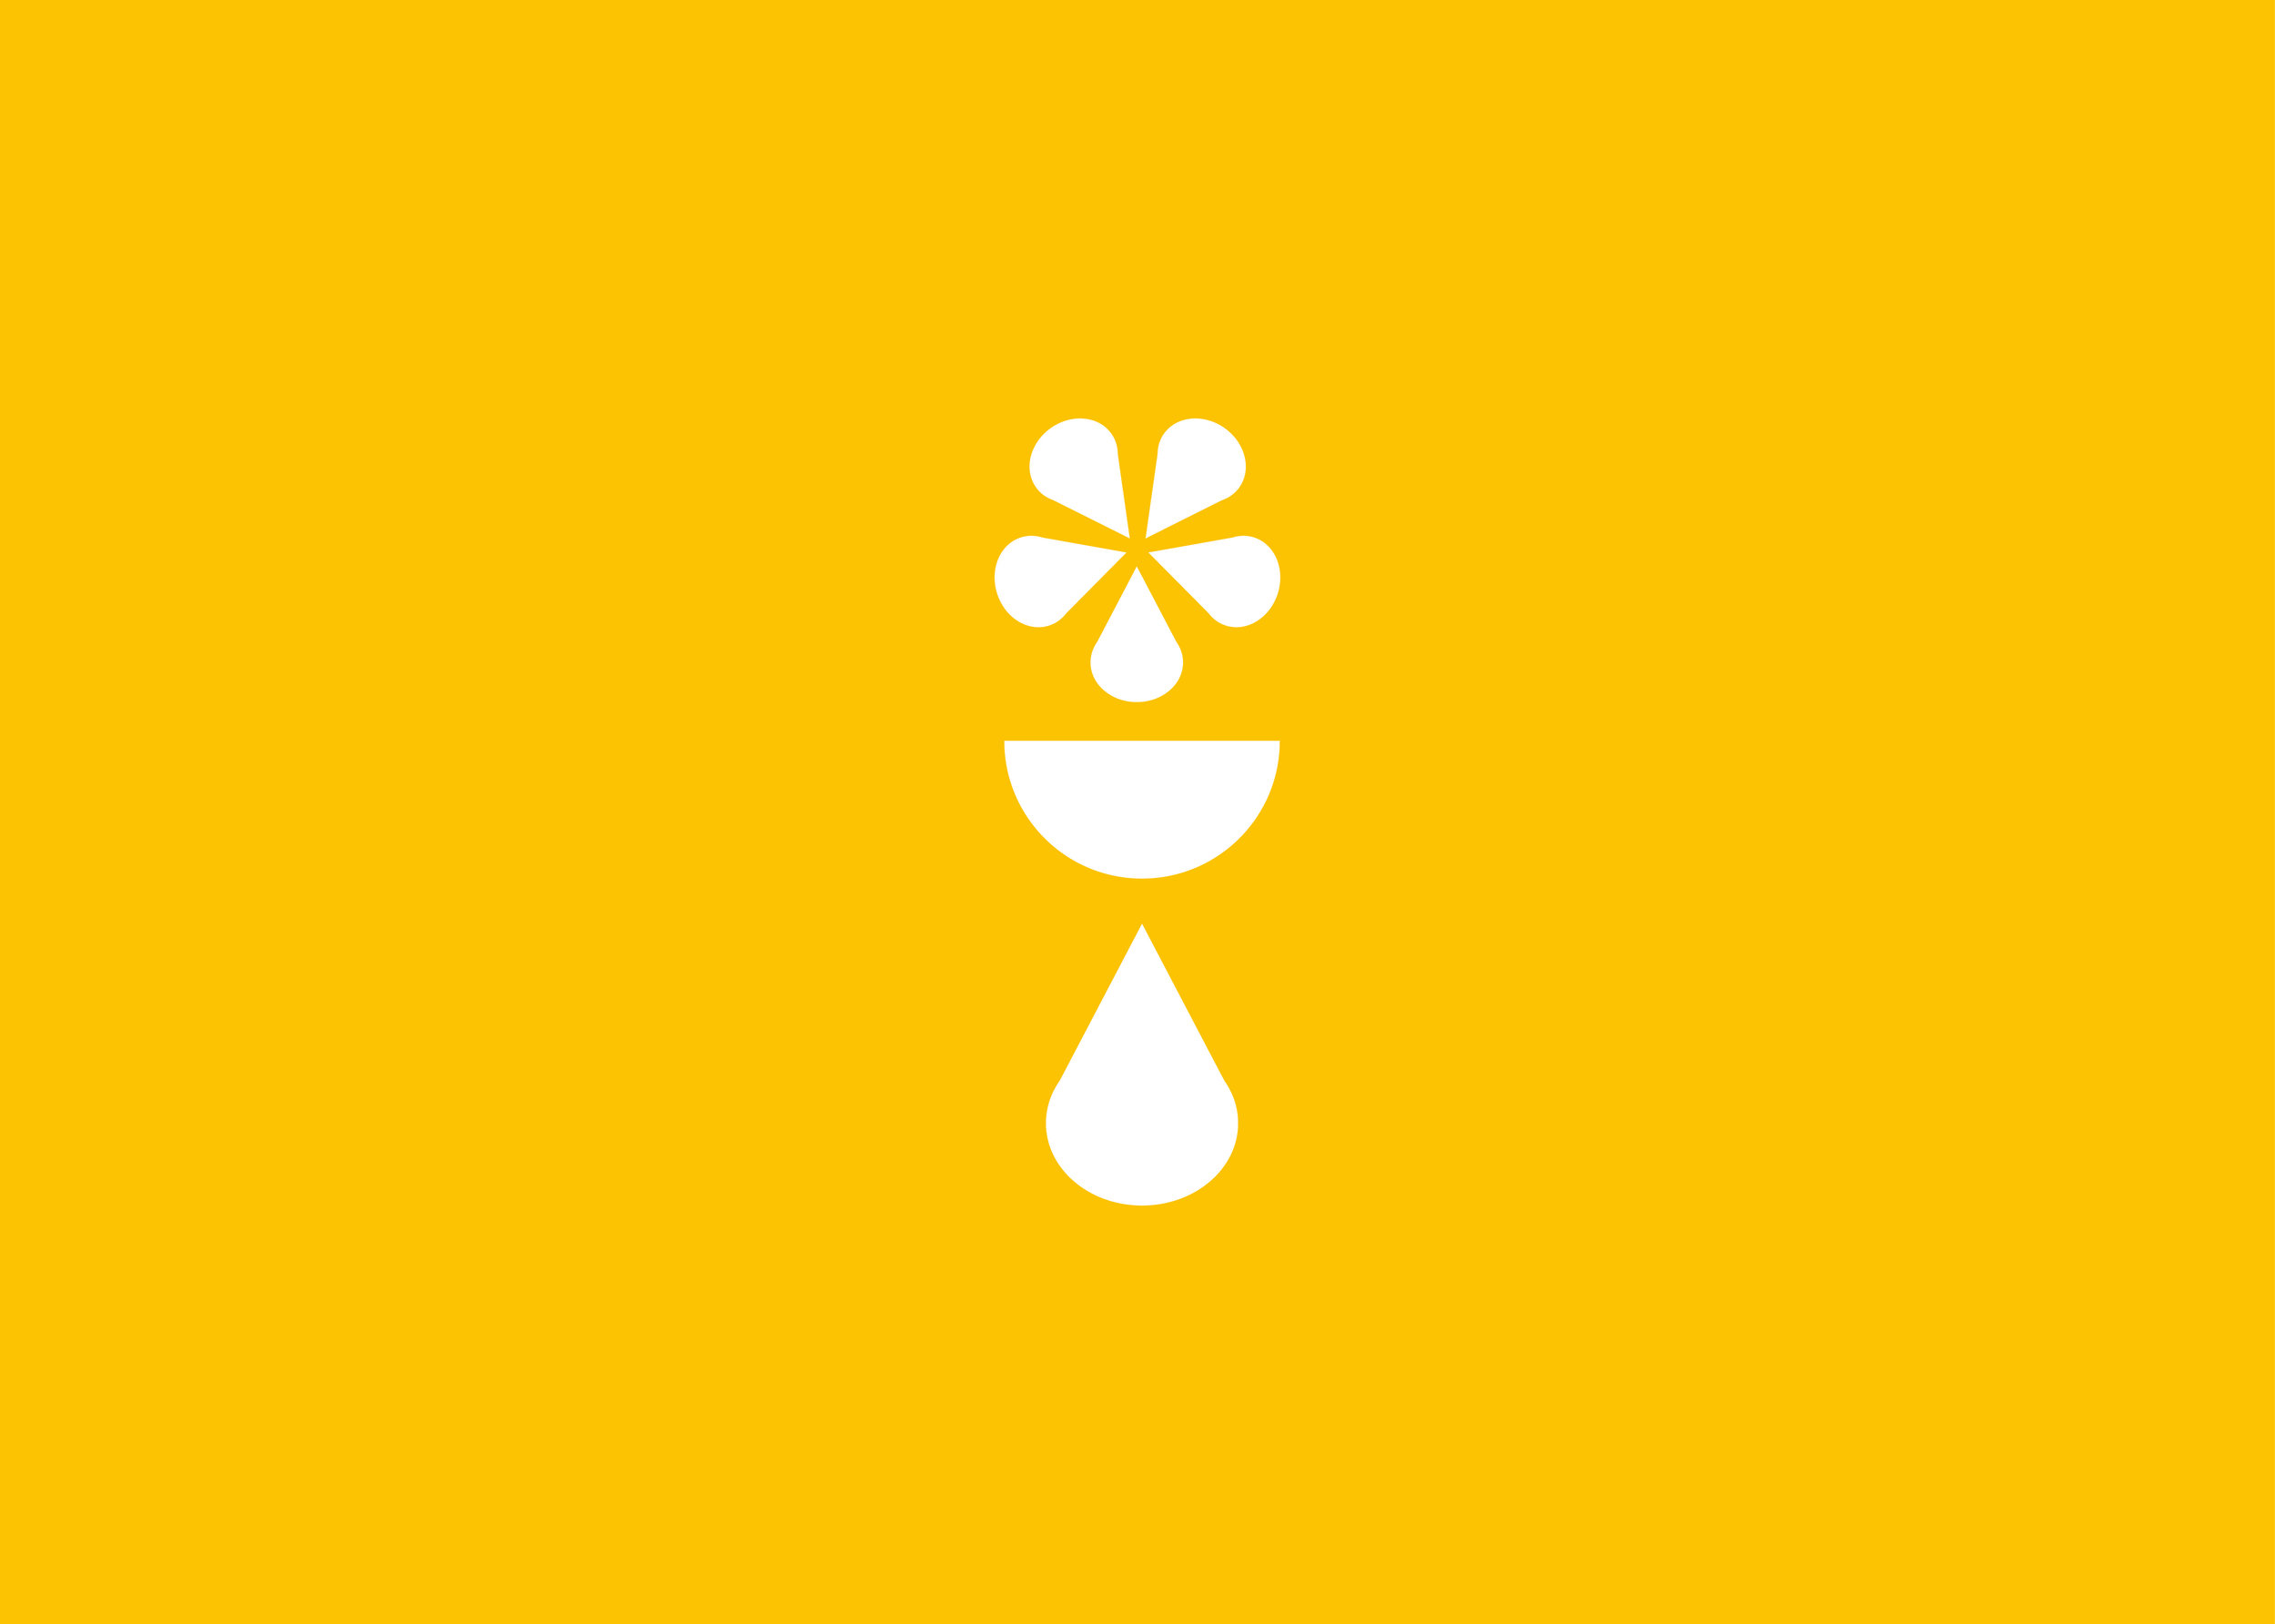 Packaging Designers UK Bodi brand vector icons in mustard background